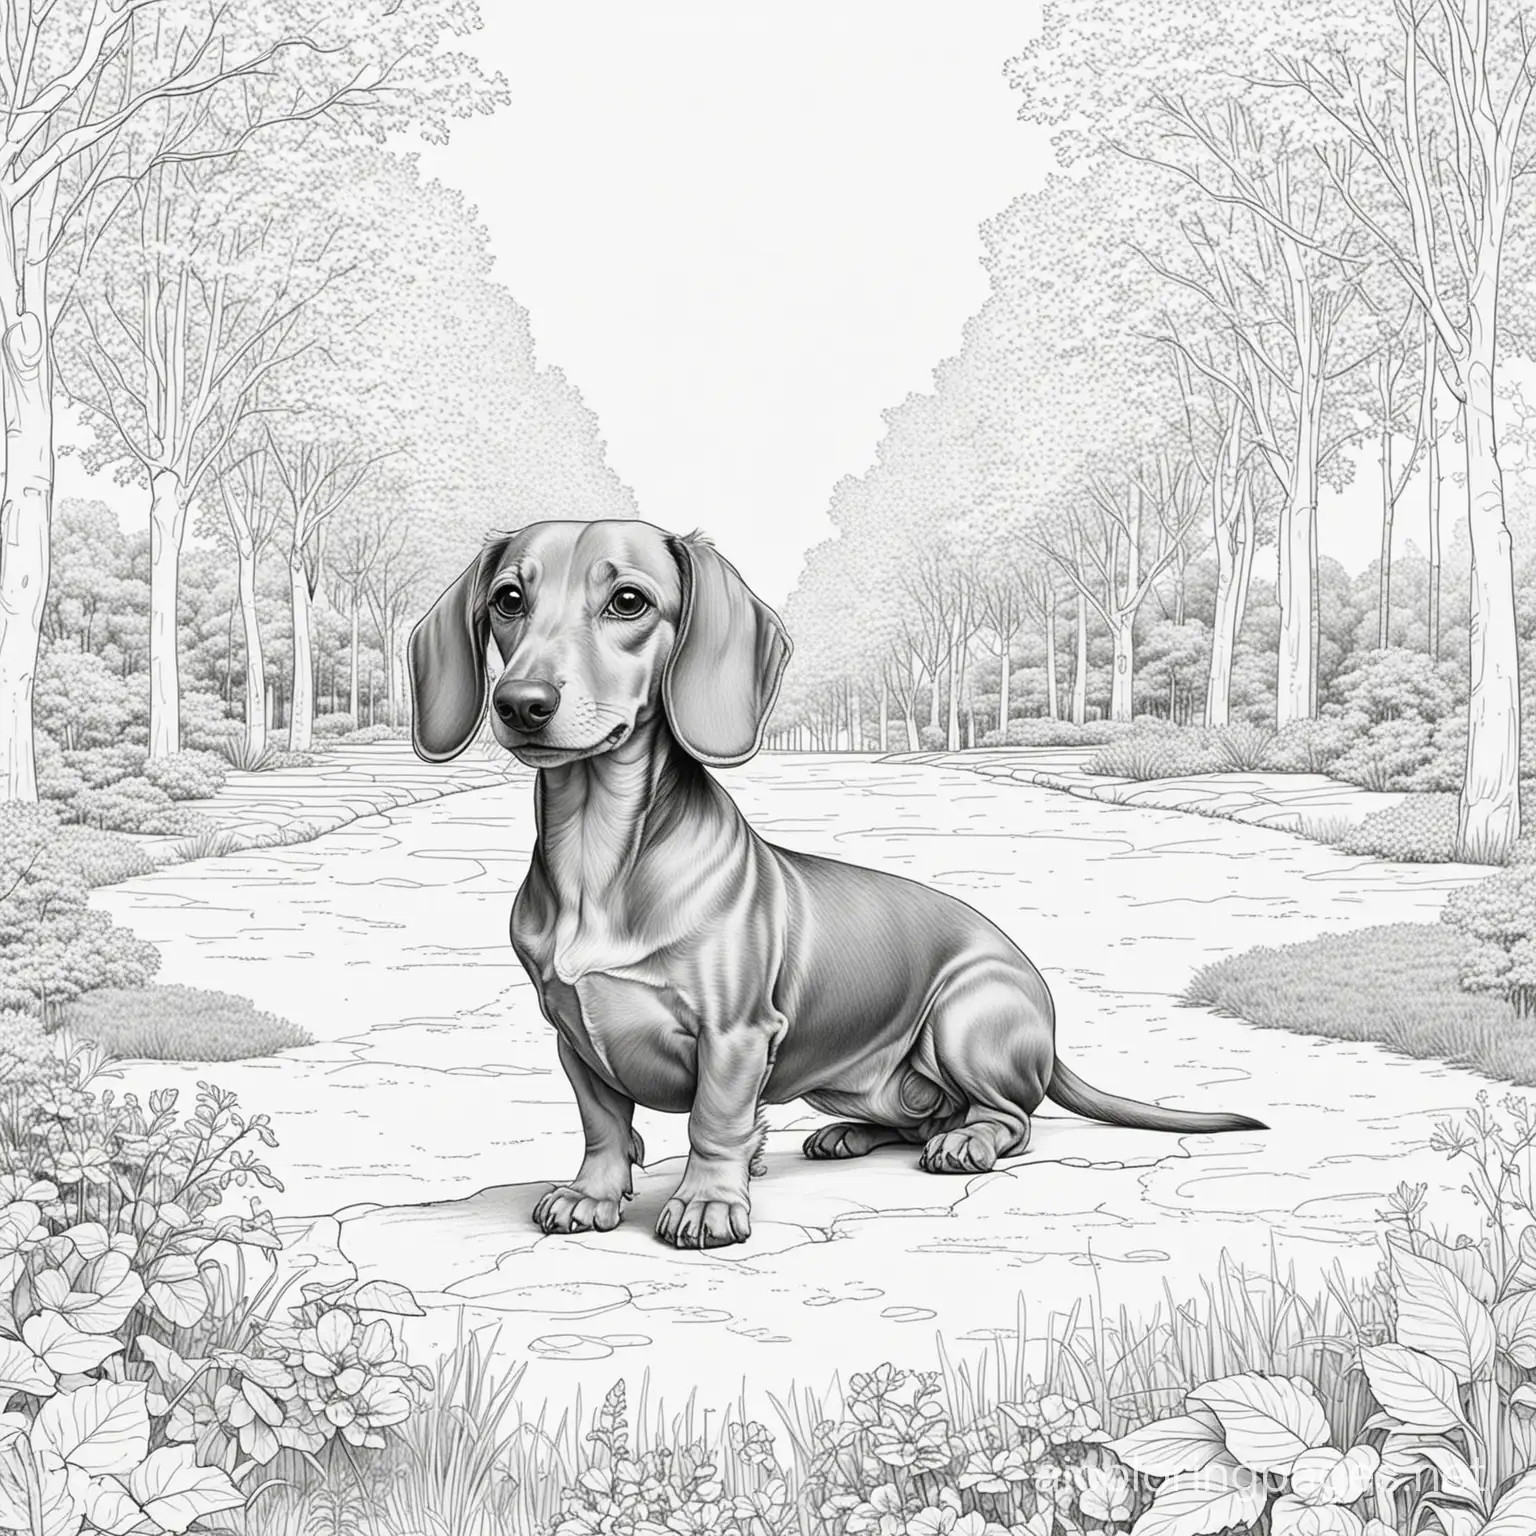 dachshund in a park

, Coloring Page, black and white, line art, white background, Simplicity, Ample White Space. The background of the coloring page is plain white to make it easy for young children to color within the lines. The outlines of all the subjects are easy to distinguish, making it simple for kids to color without too much difficulty